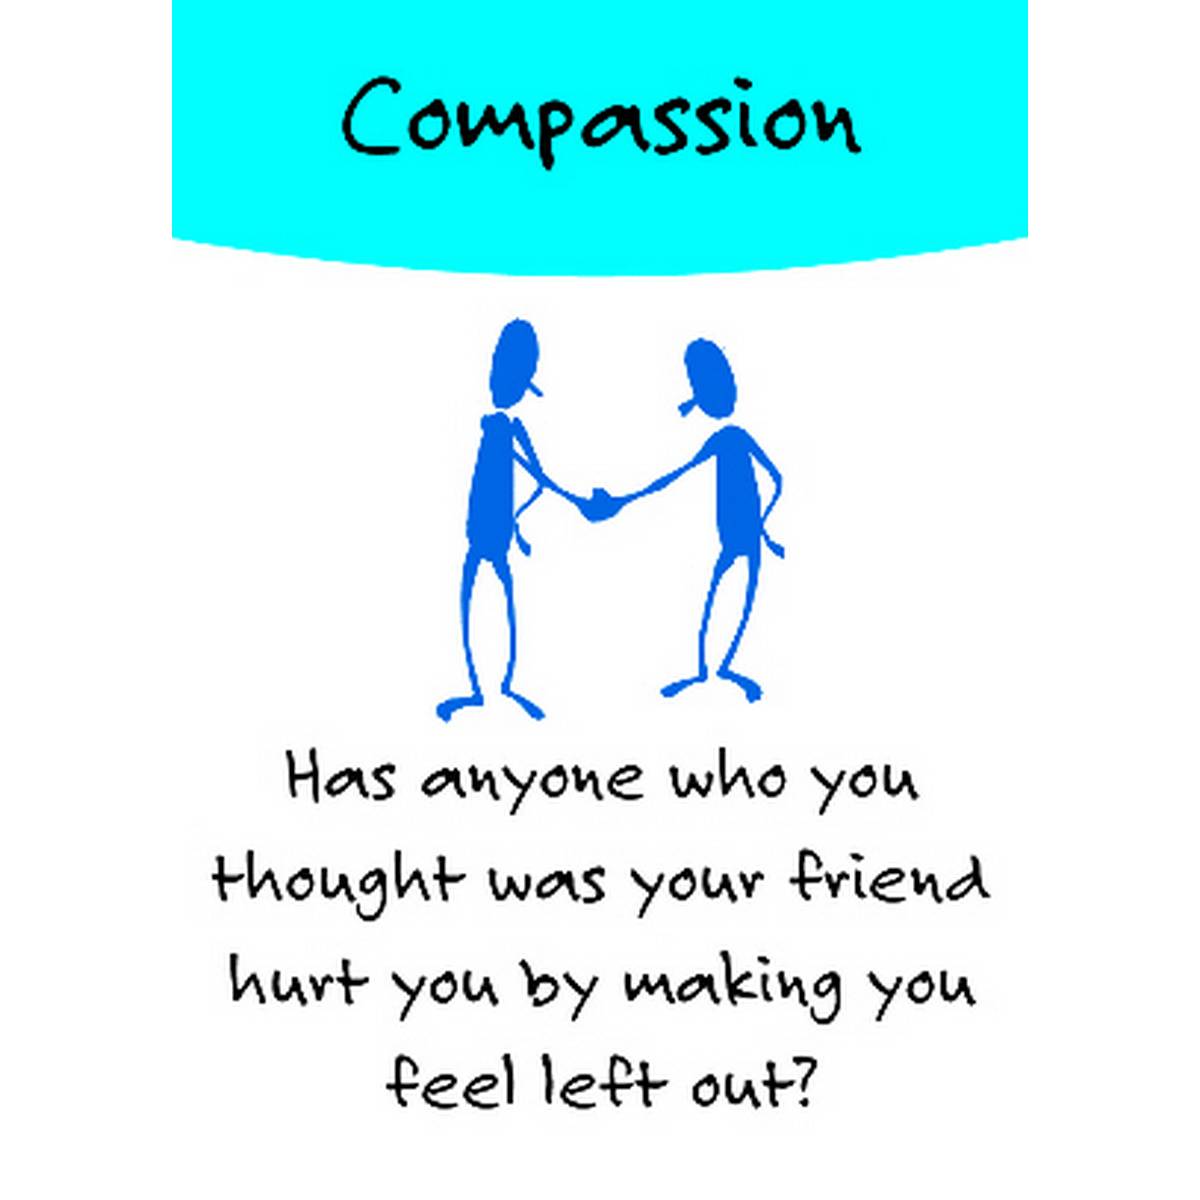 Compassion Card Game